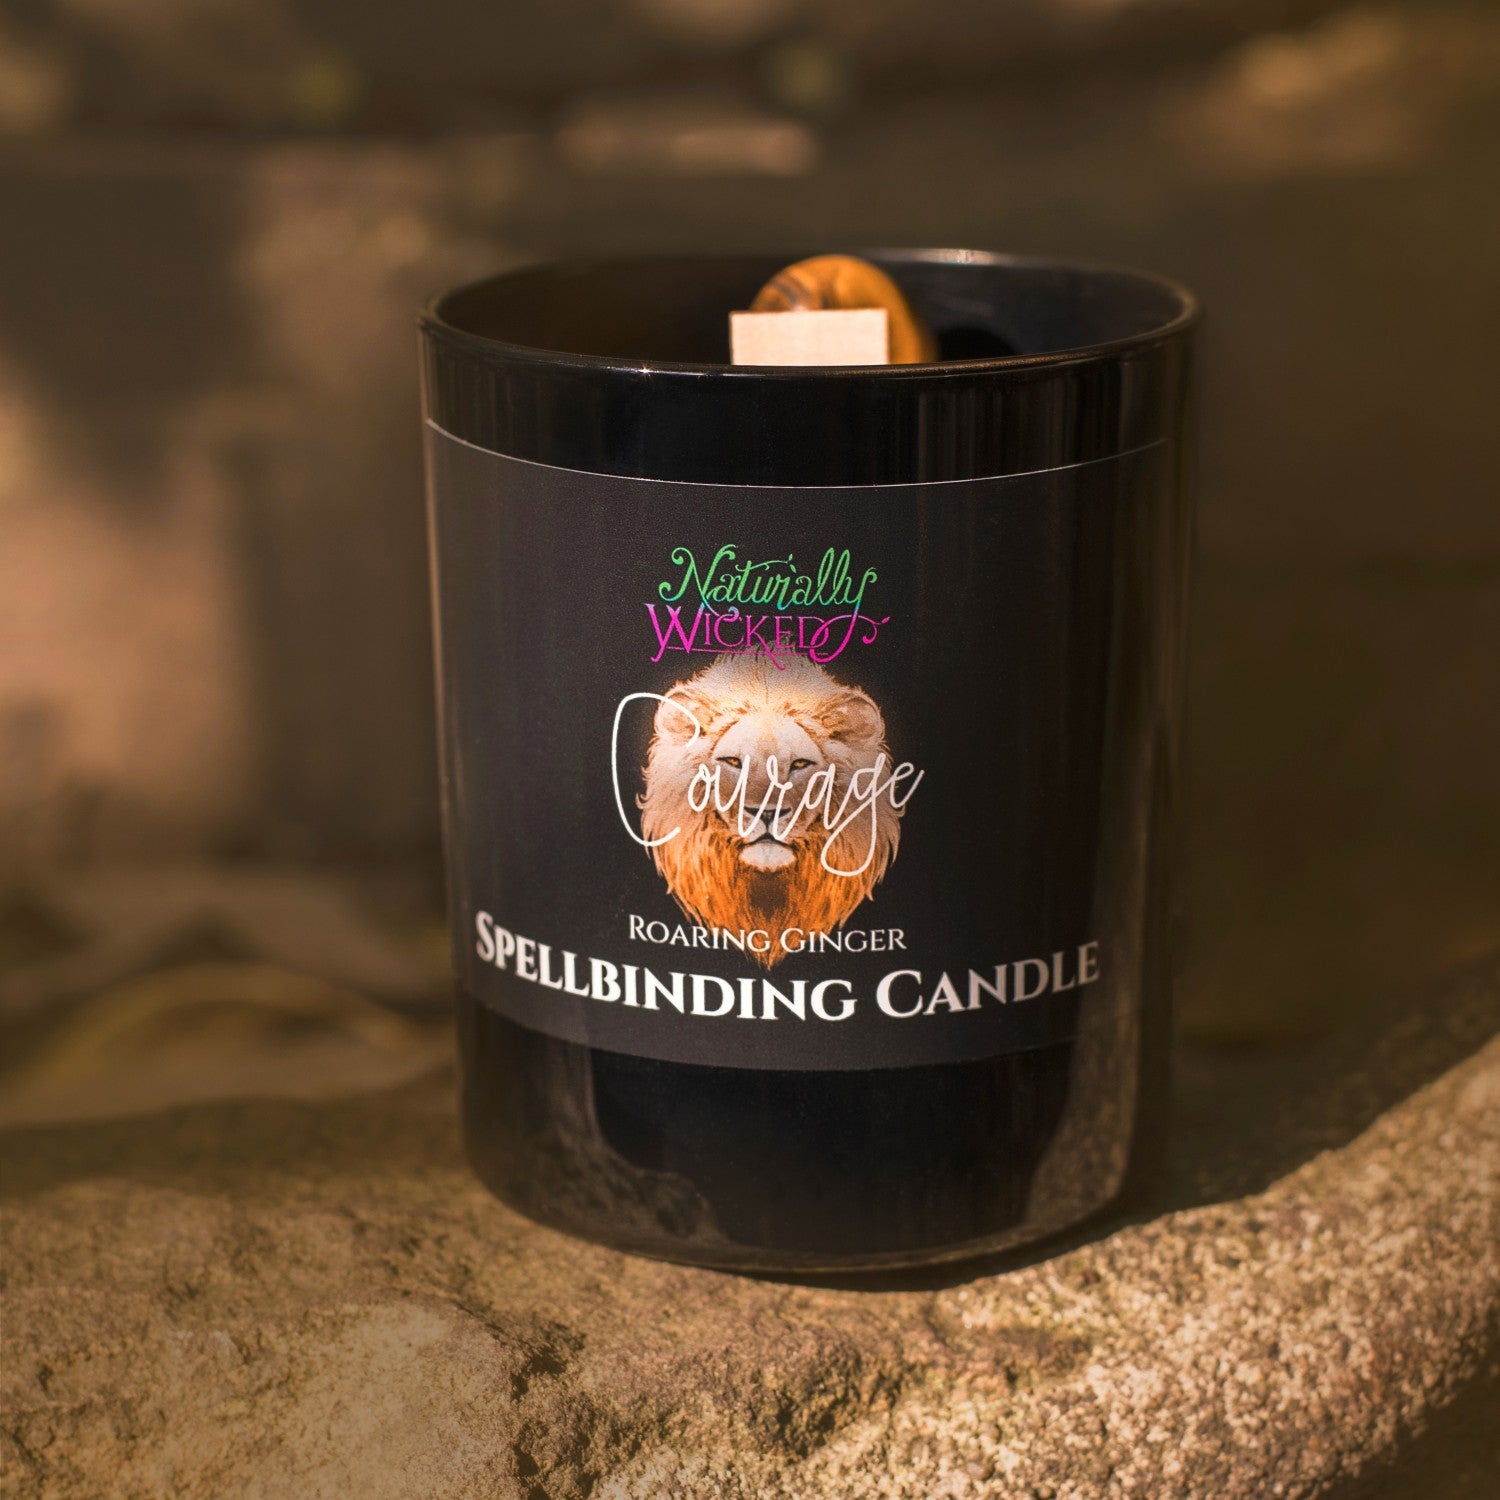 A Scenic View Of The Perfect Spell Candle. Naturally Wicked Spellbinding Courage Candle Proudly Presents It's Dark Black Gloss Label With A Roaring Ginger Lion On The Front.  The Candle Features Plant-based Smooth Brown Wax, A Wood Wick And A Beautiful Tiger's Eye Crystal. A Courageous Gift For All